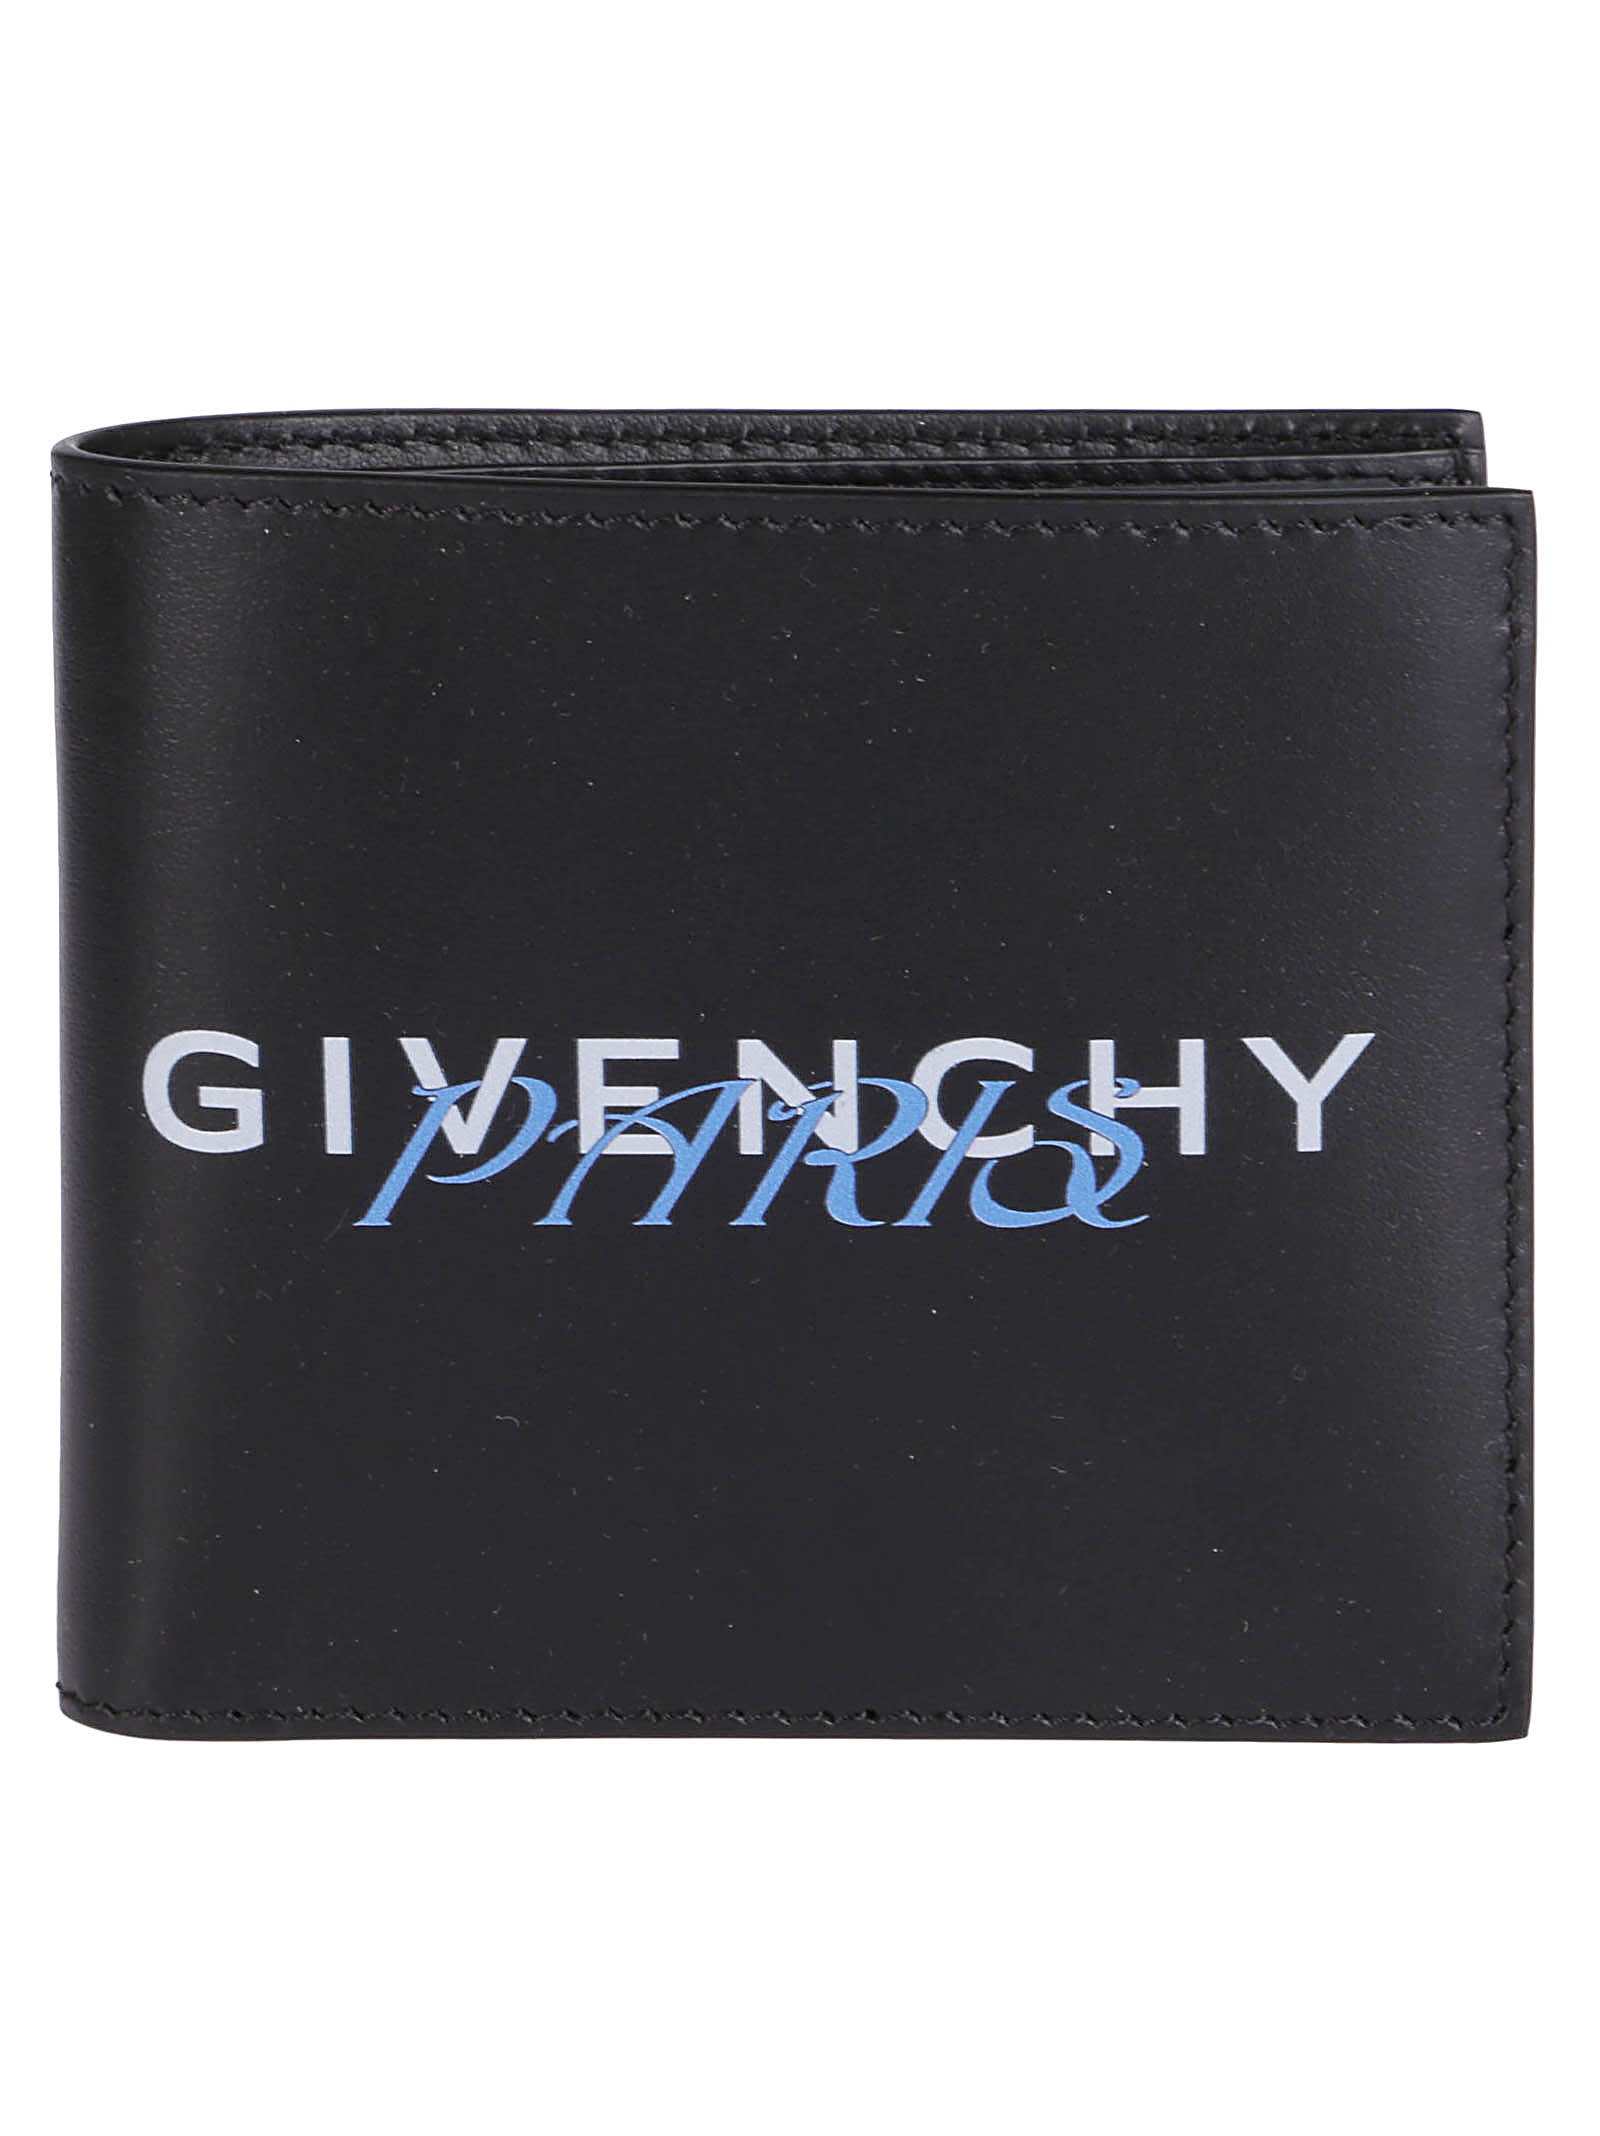 GIVENCHY BLACK LEATHER WALLET,11314815